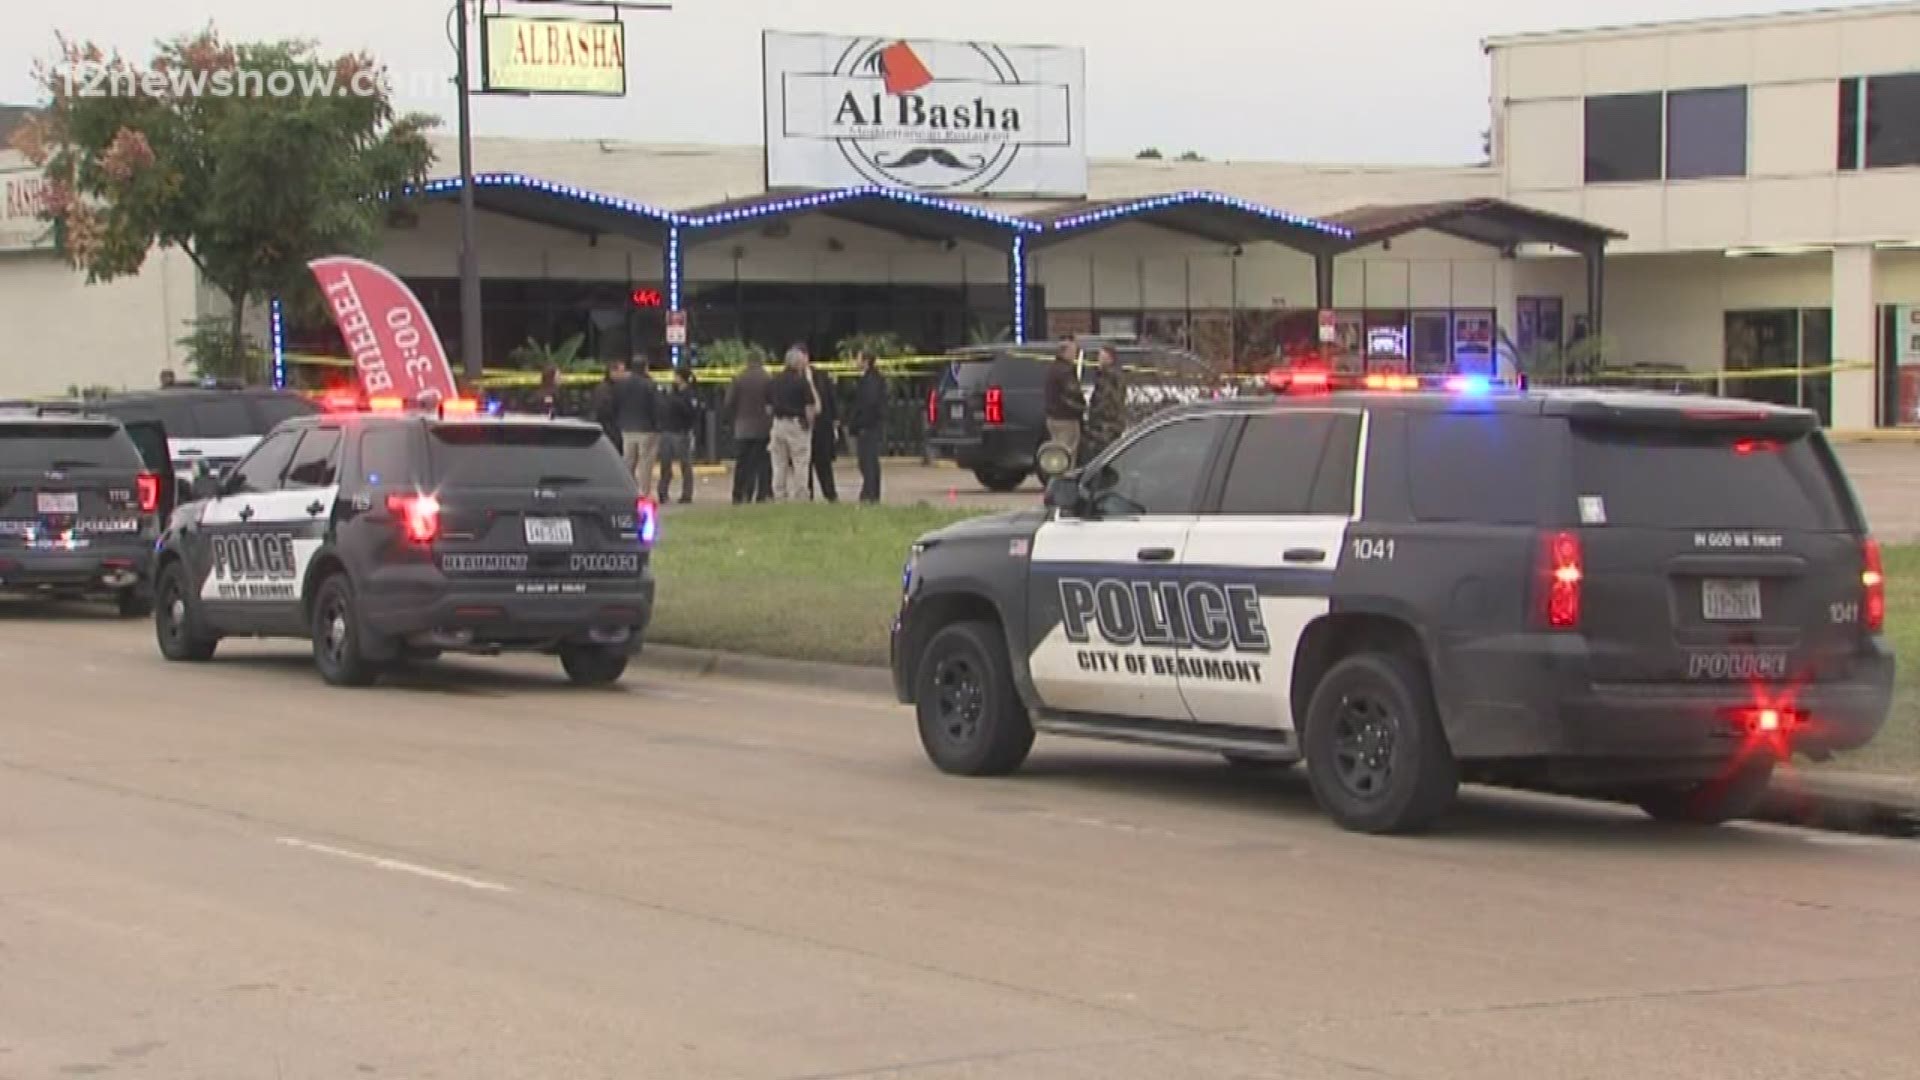 A burglary suspect is dead after being shot by a Beaumont Police officer responding to a burglary call at a Beaumont restaurant Thursday morning.